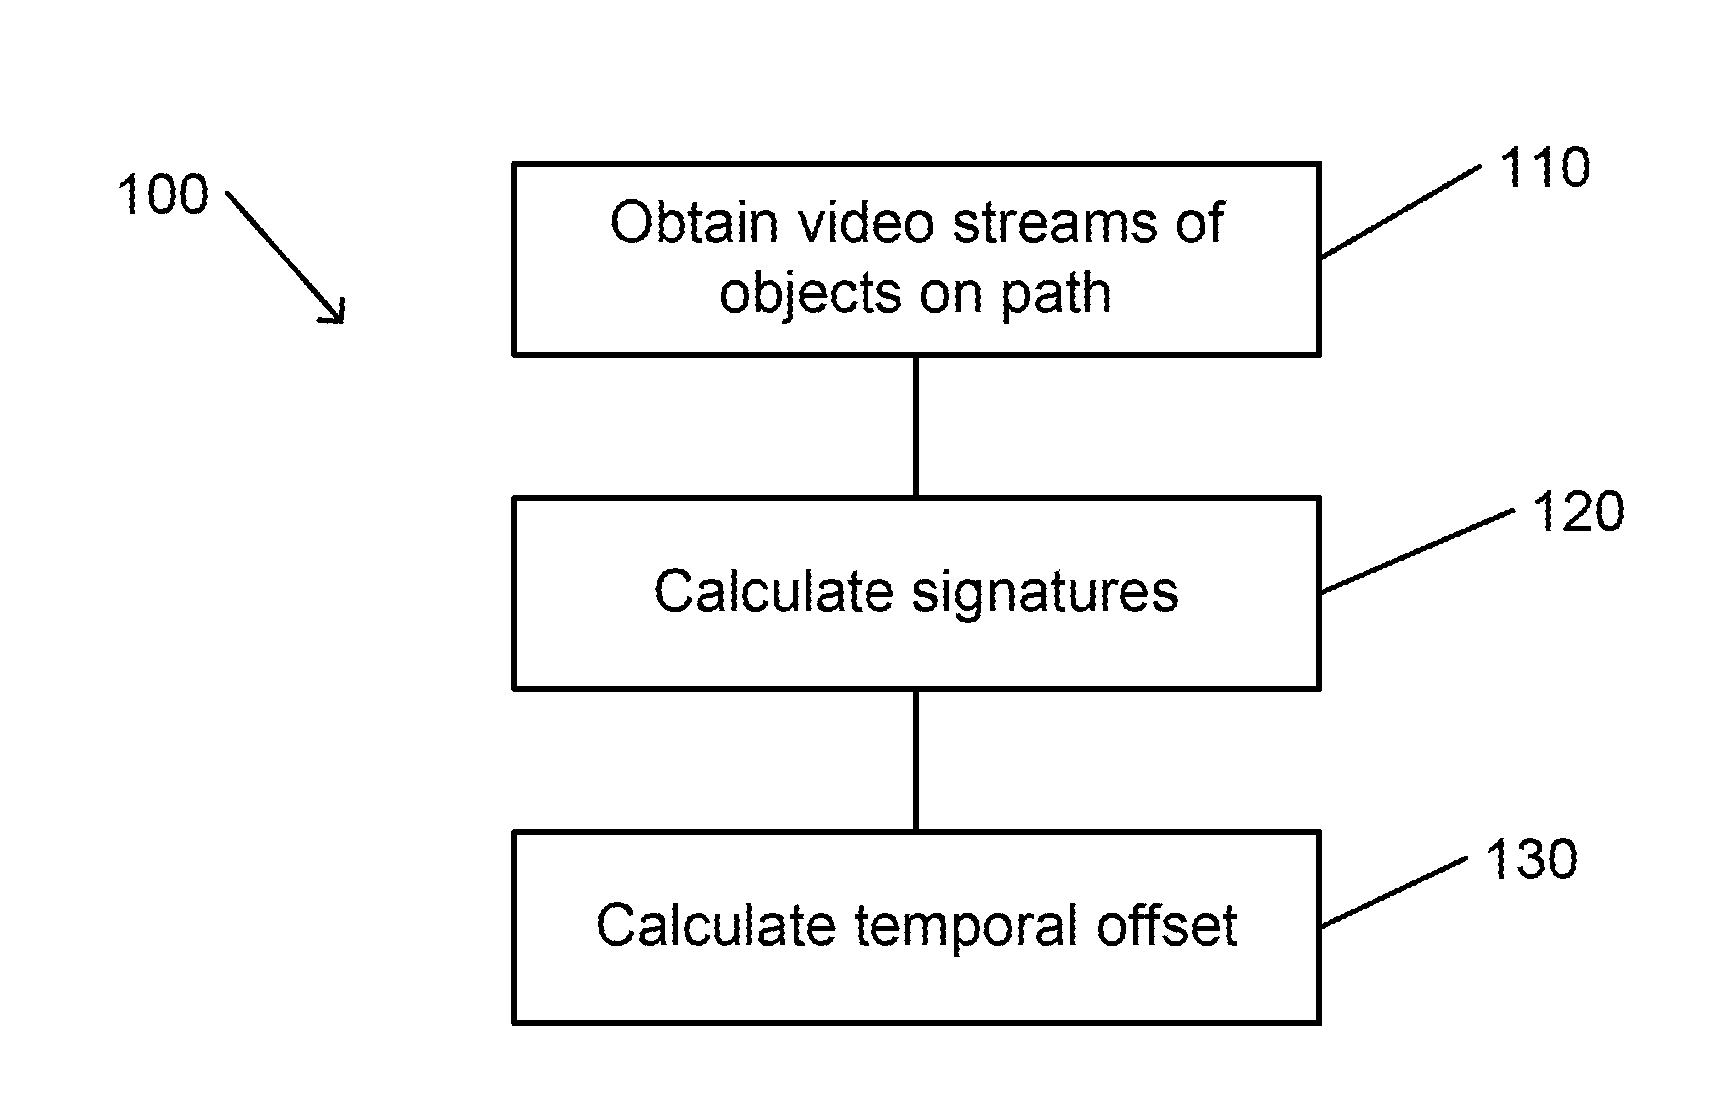 Automatic time signature-based video matching for a camera network